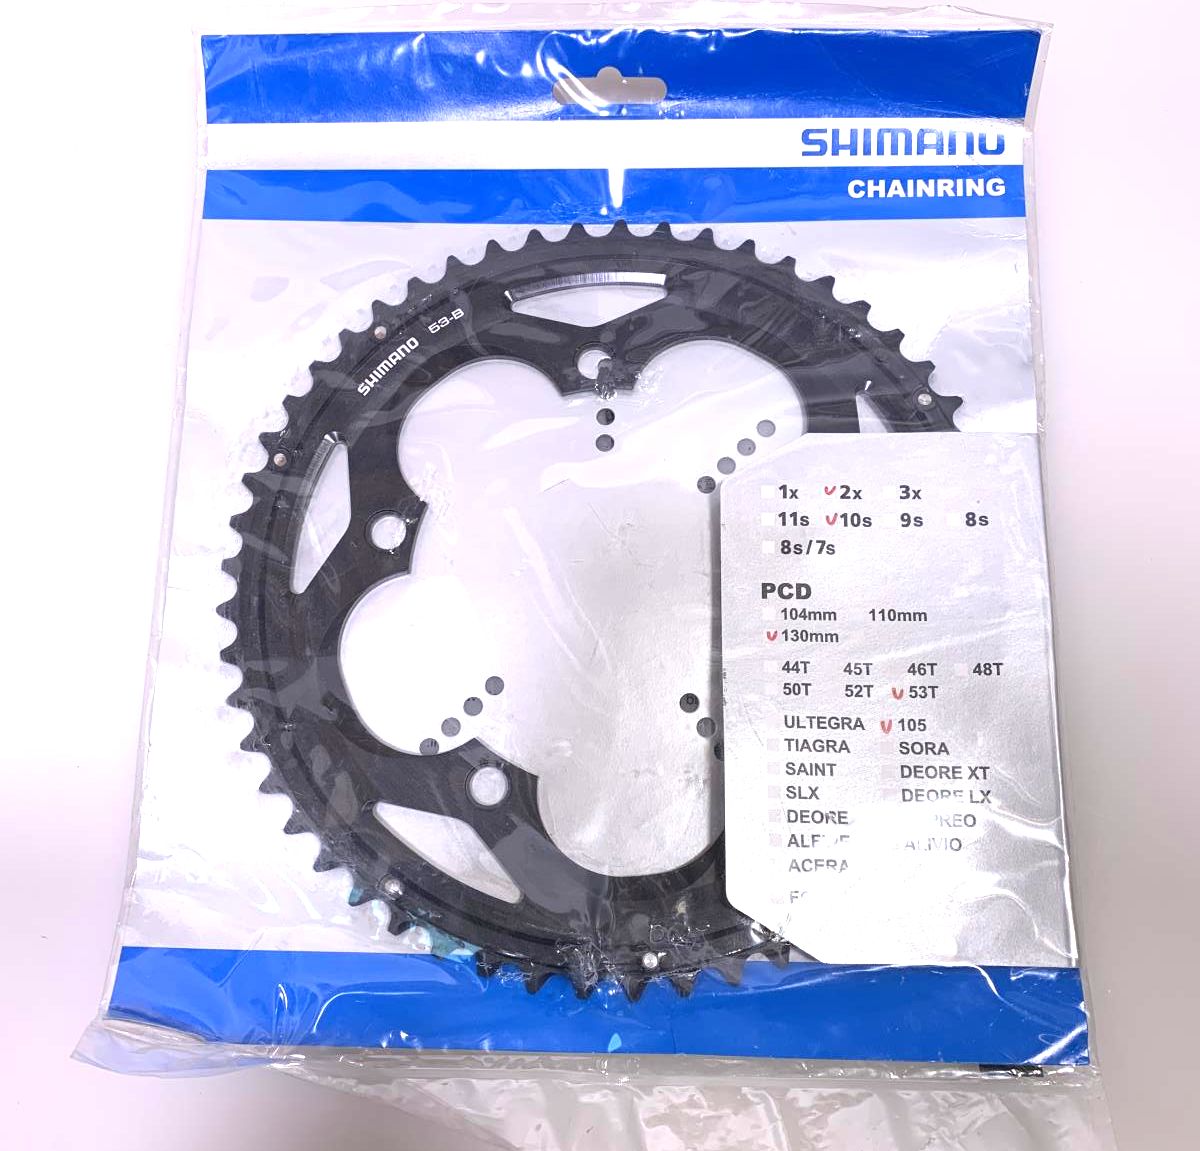 Shimano 105 FC-5700L 53T 10 Speed Bike Chainring 130mm BCD New